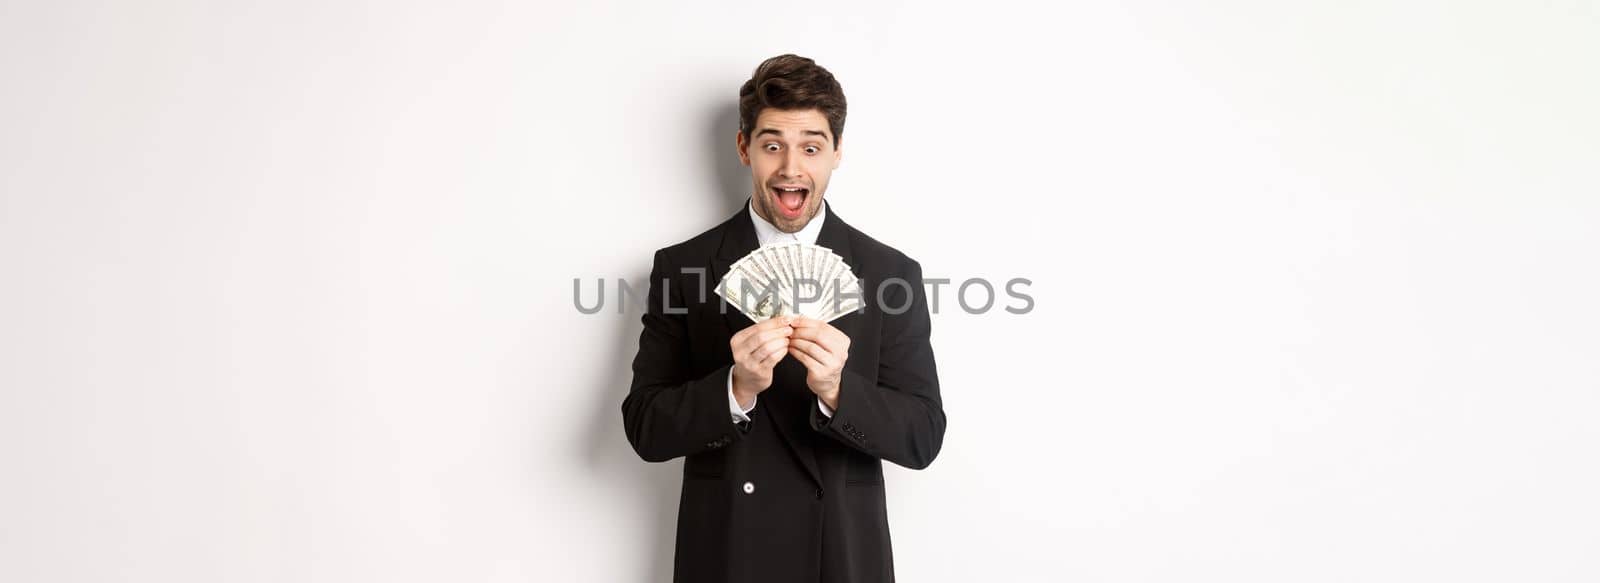 Image of handsome bearded guy in black suit, looking at money with excitement, standing over white background.